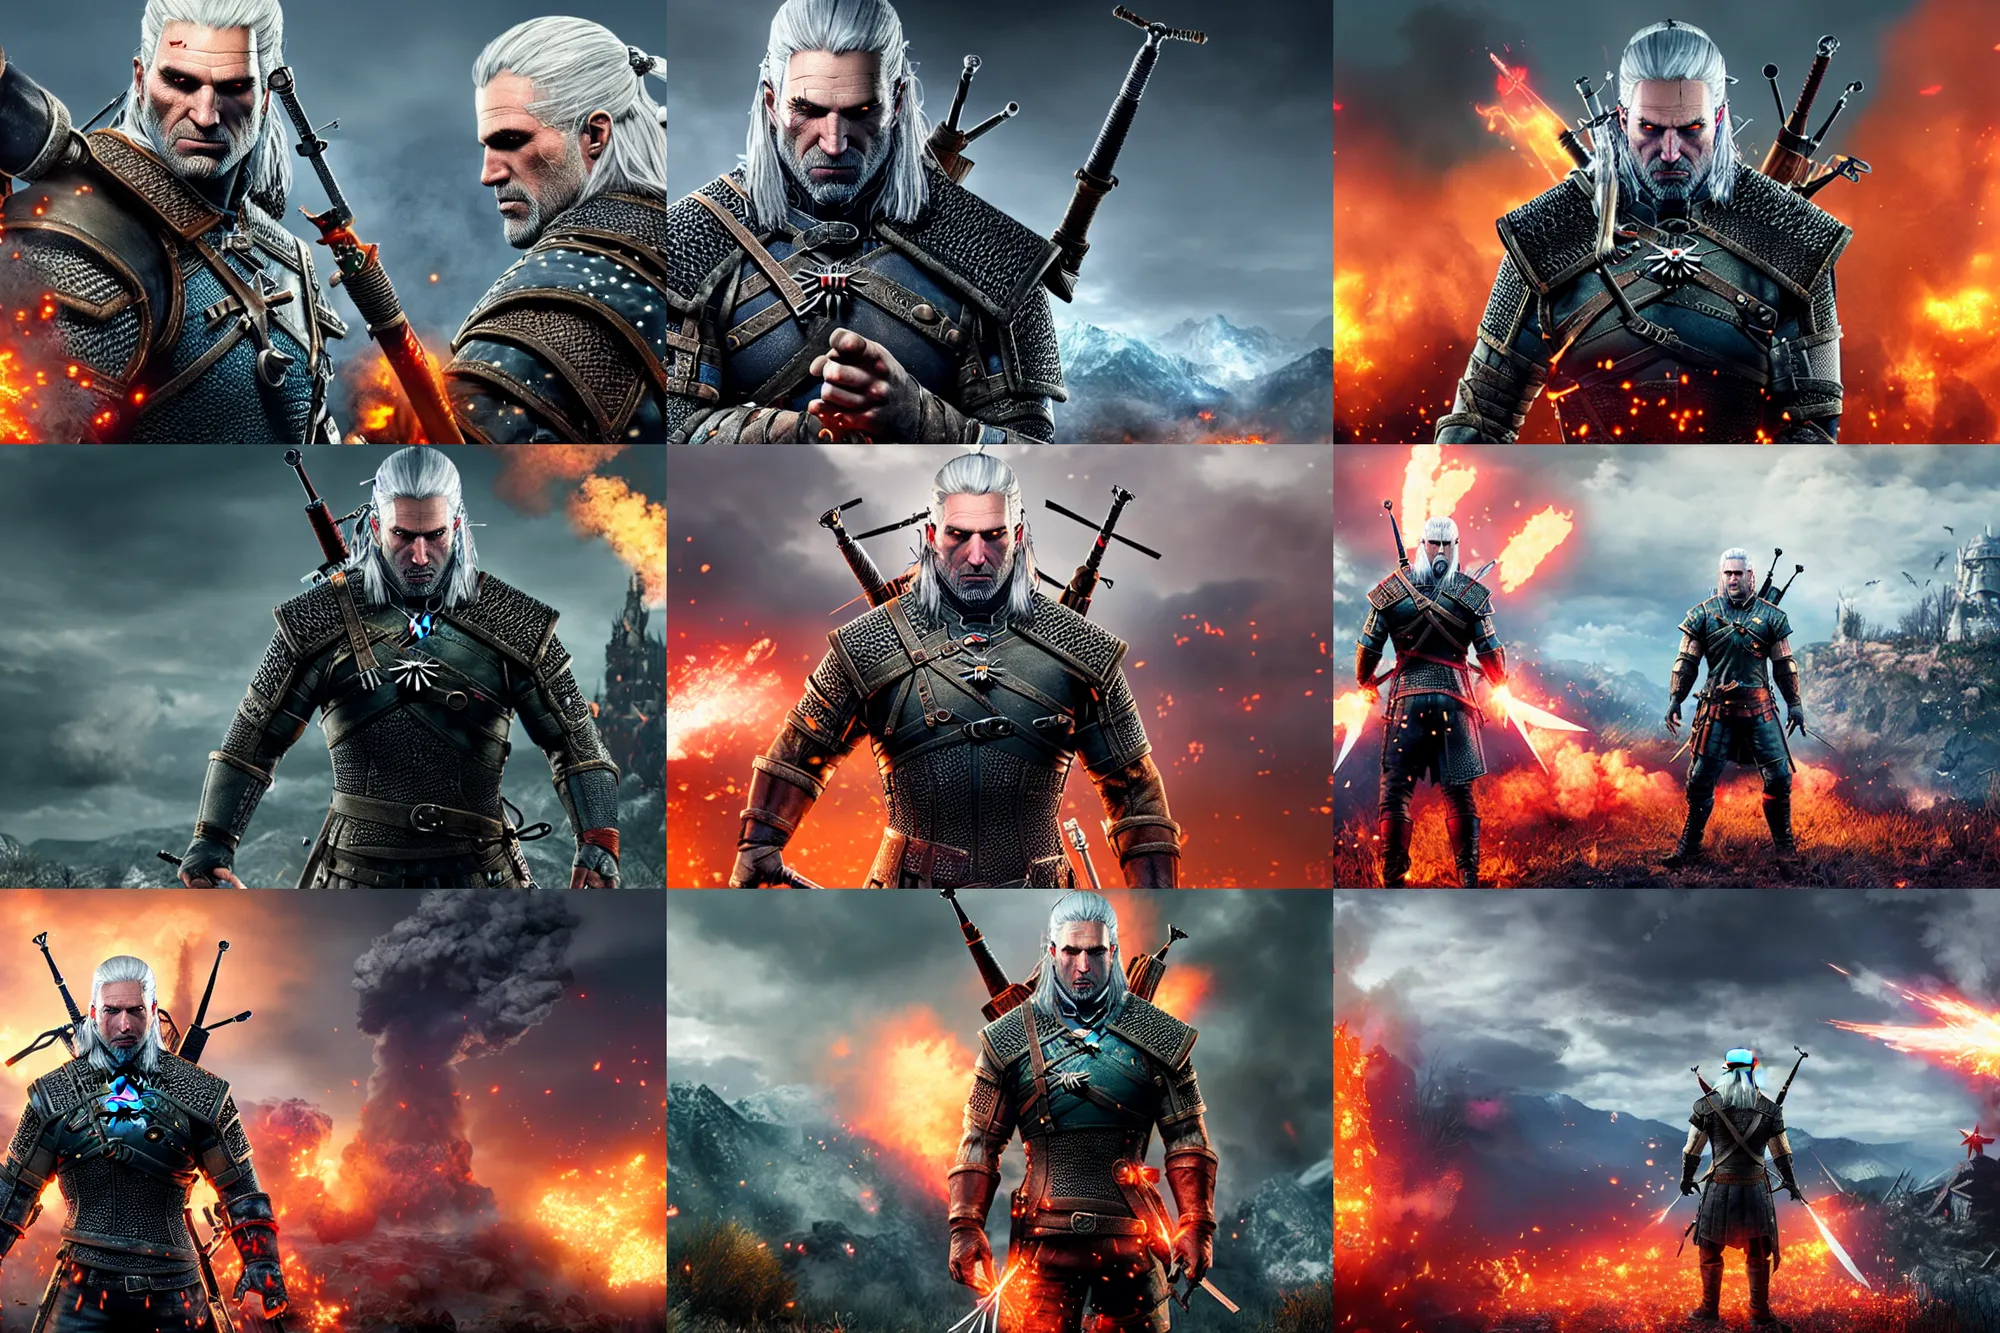 The Witcher Remastered 4K Cutscenes Using AI : r/witcher